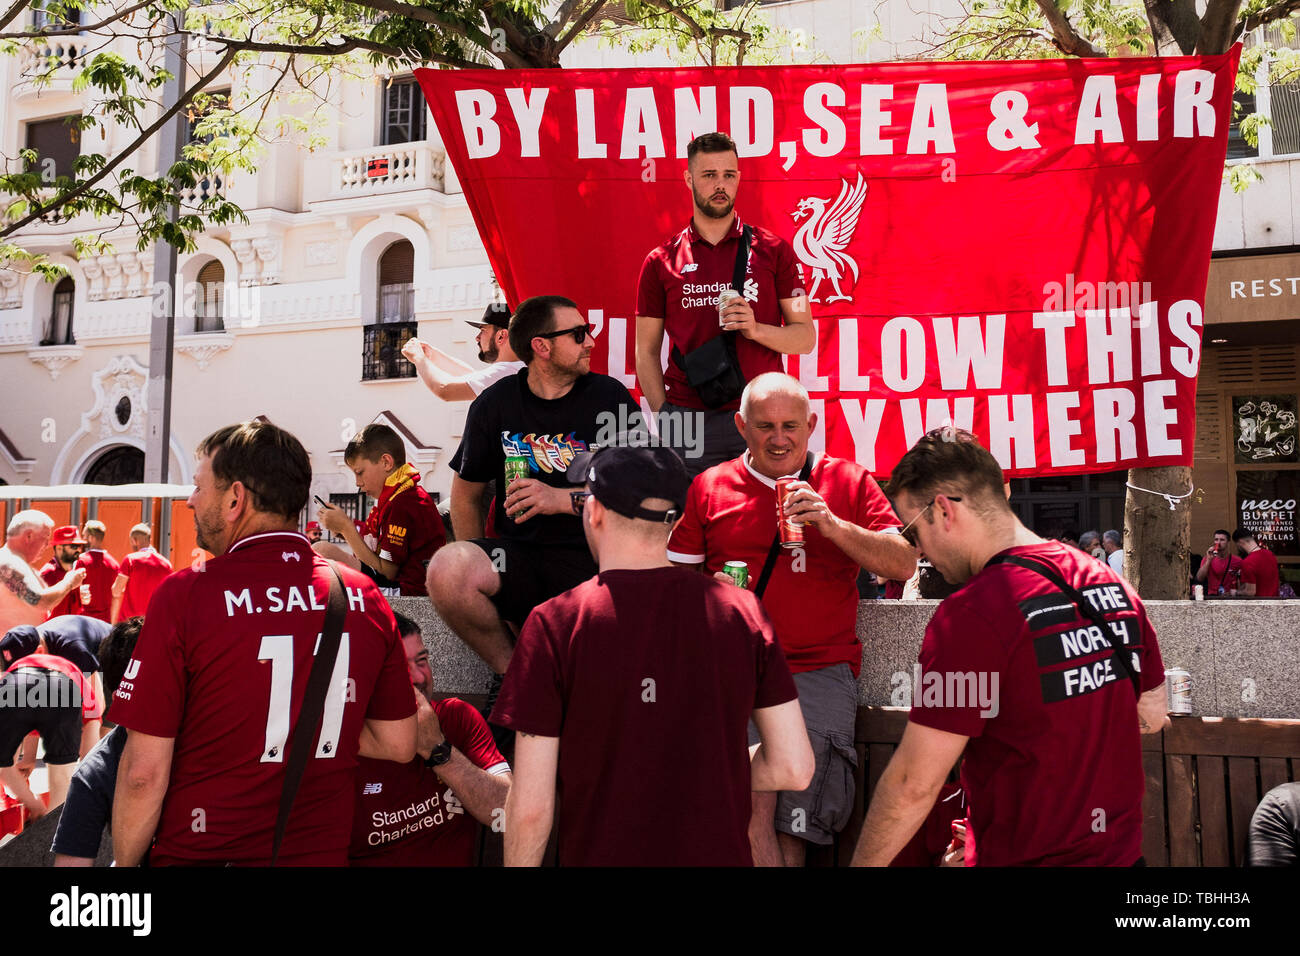 Liverpool fans next to a banner at the fan zone. Madrid hosts the UEFA Champions League Final between Liverpool and Tottenham Hotspur at the Wanda Metropolitano Stadium. Stock Photo